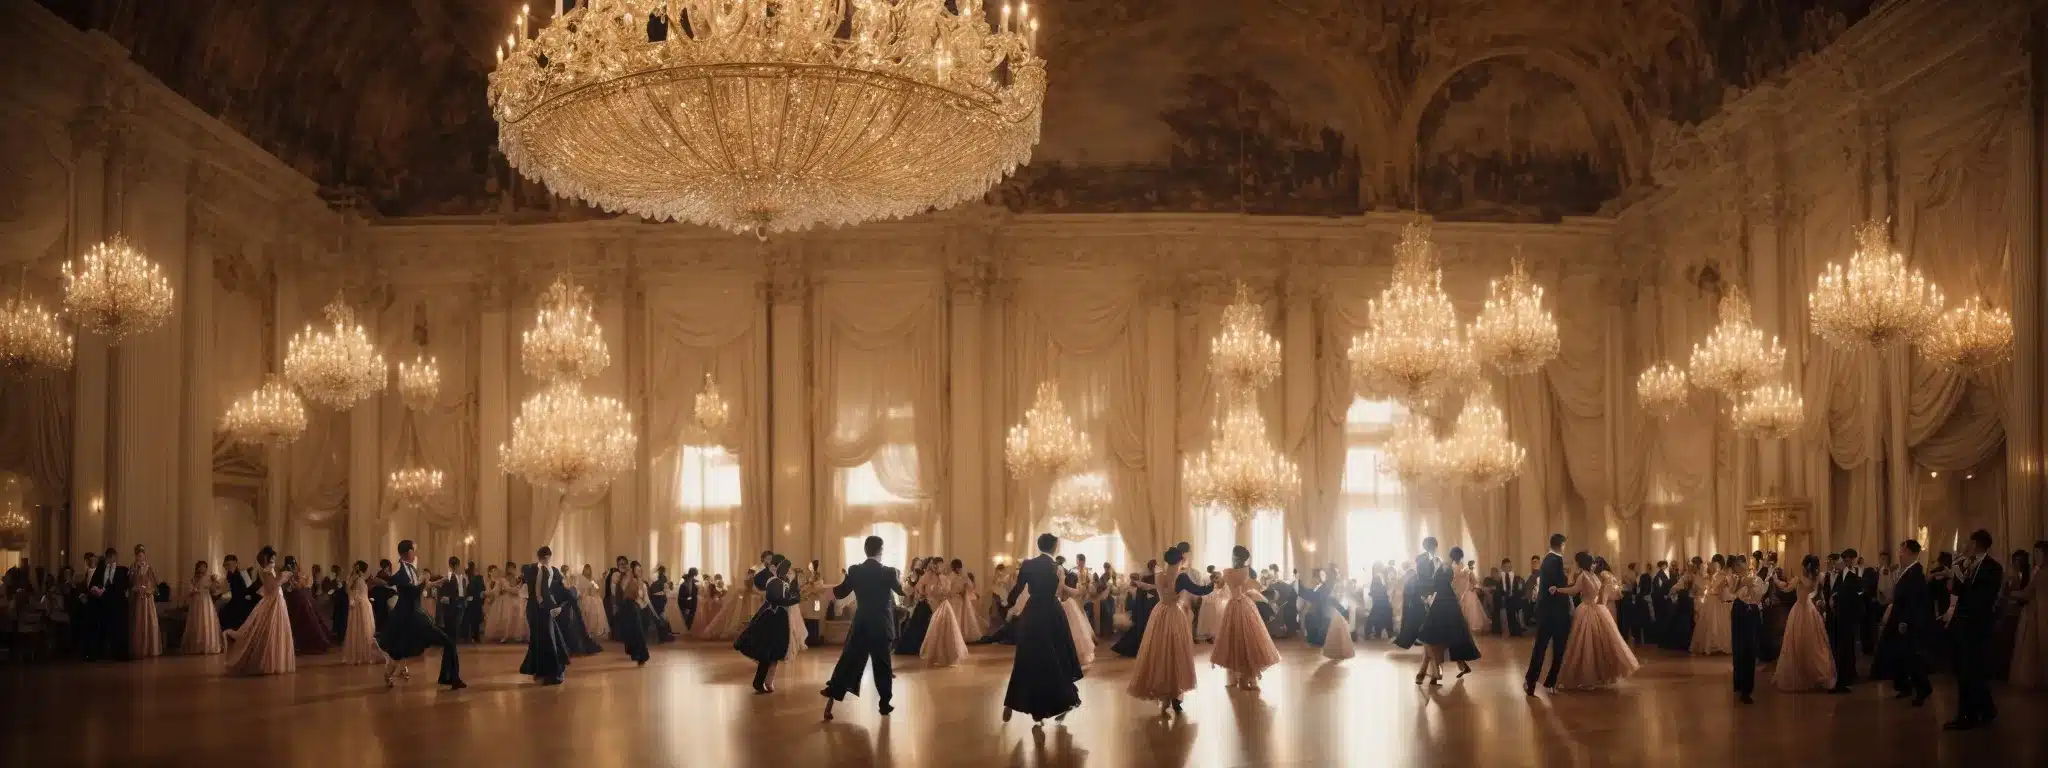 A Grand Ballroom With Elegant Dancers Moving In Unison Beneath A Magnificent Chandelier.